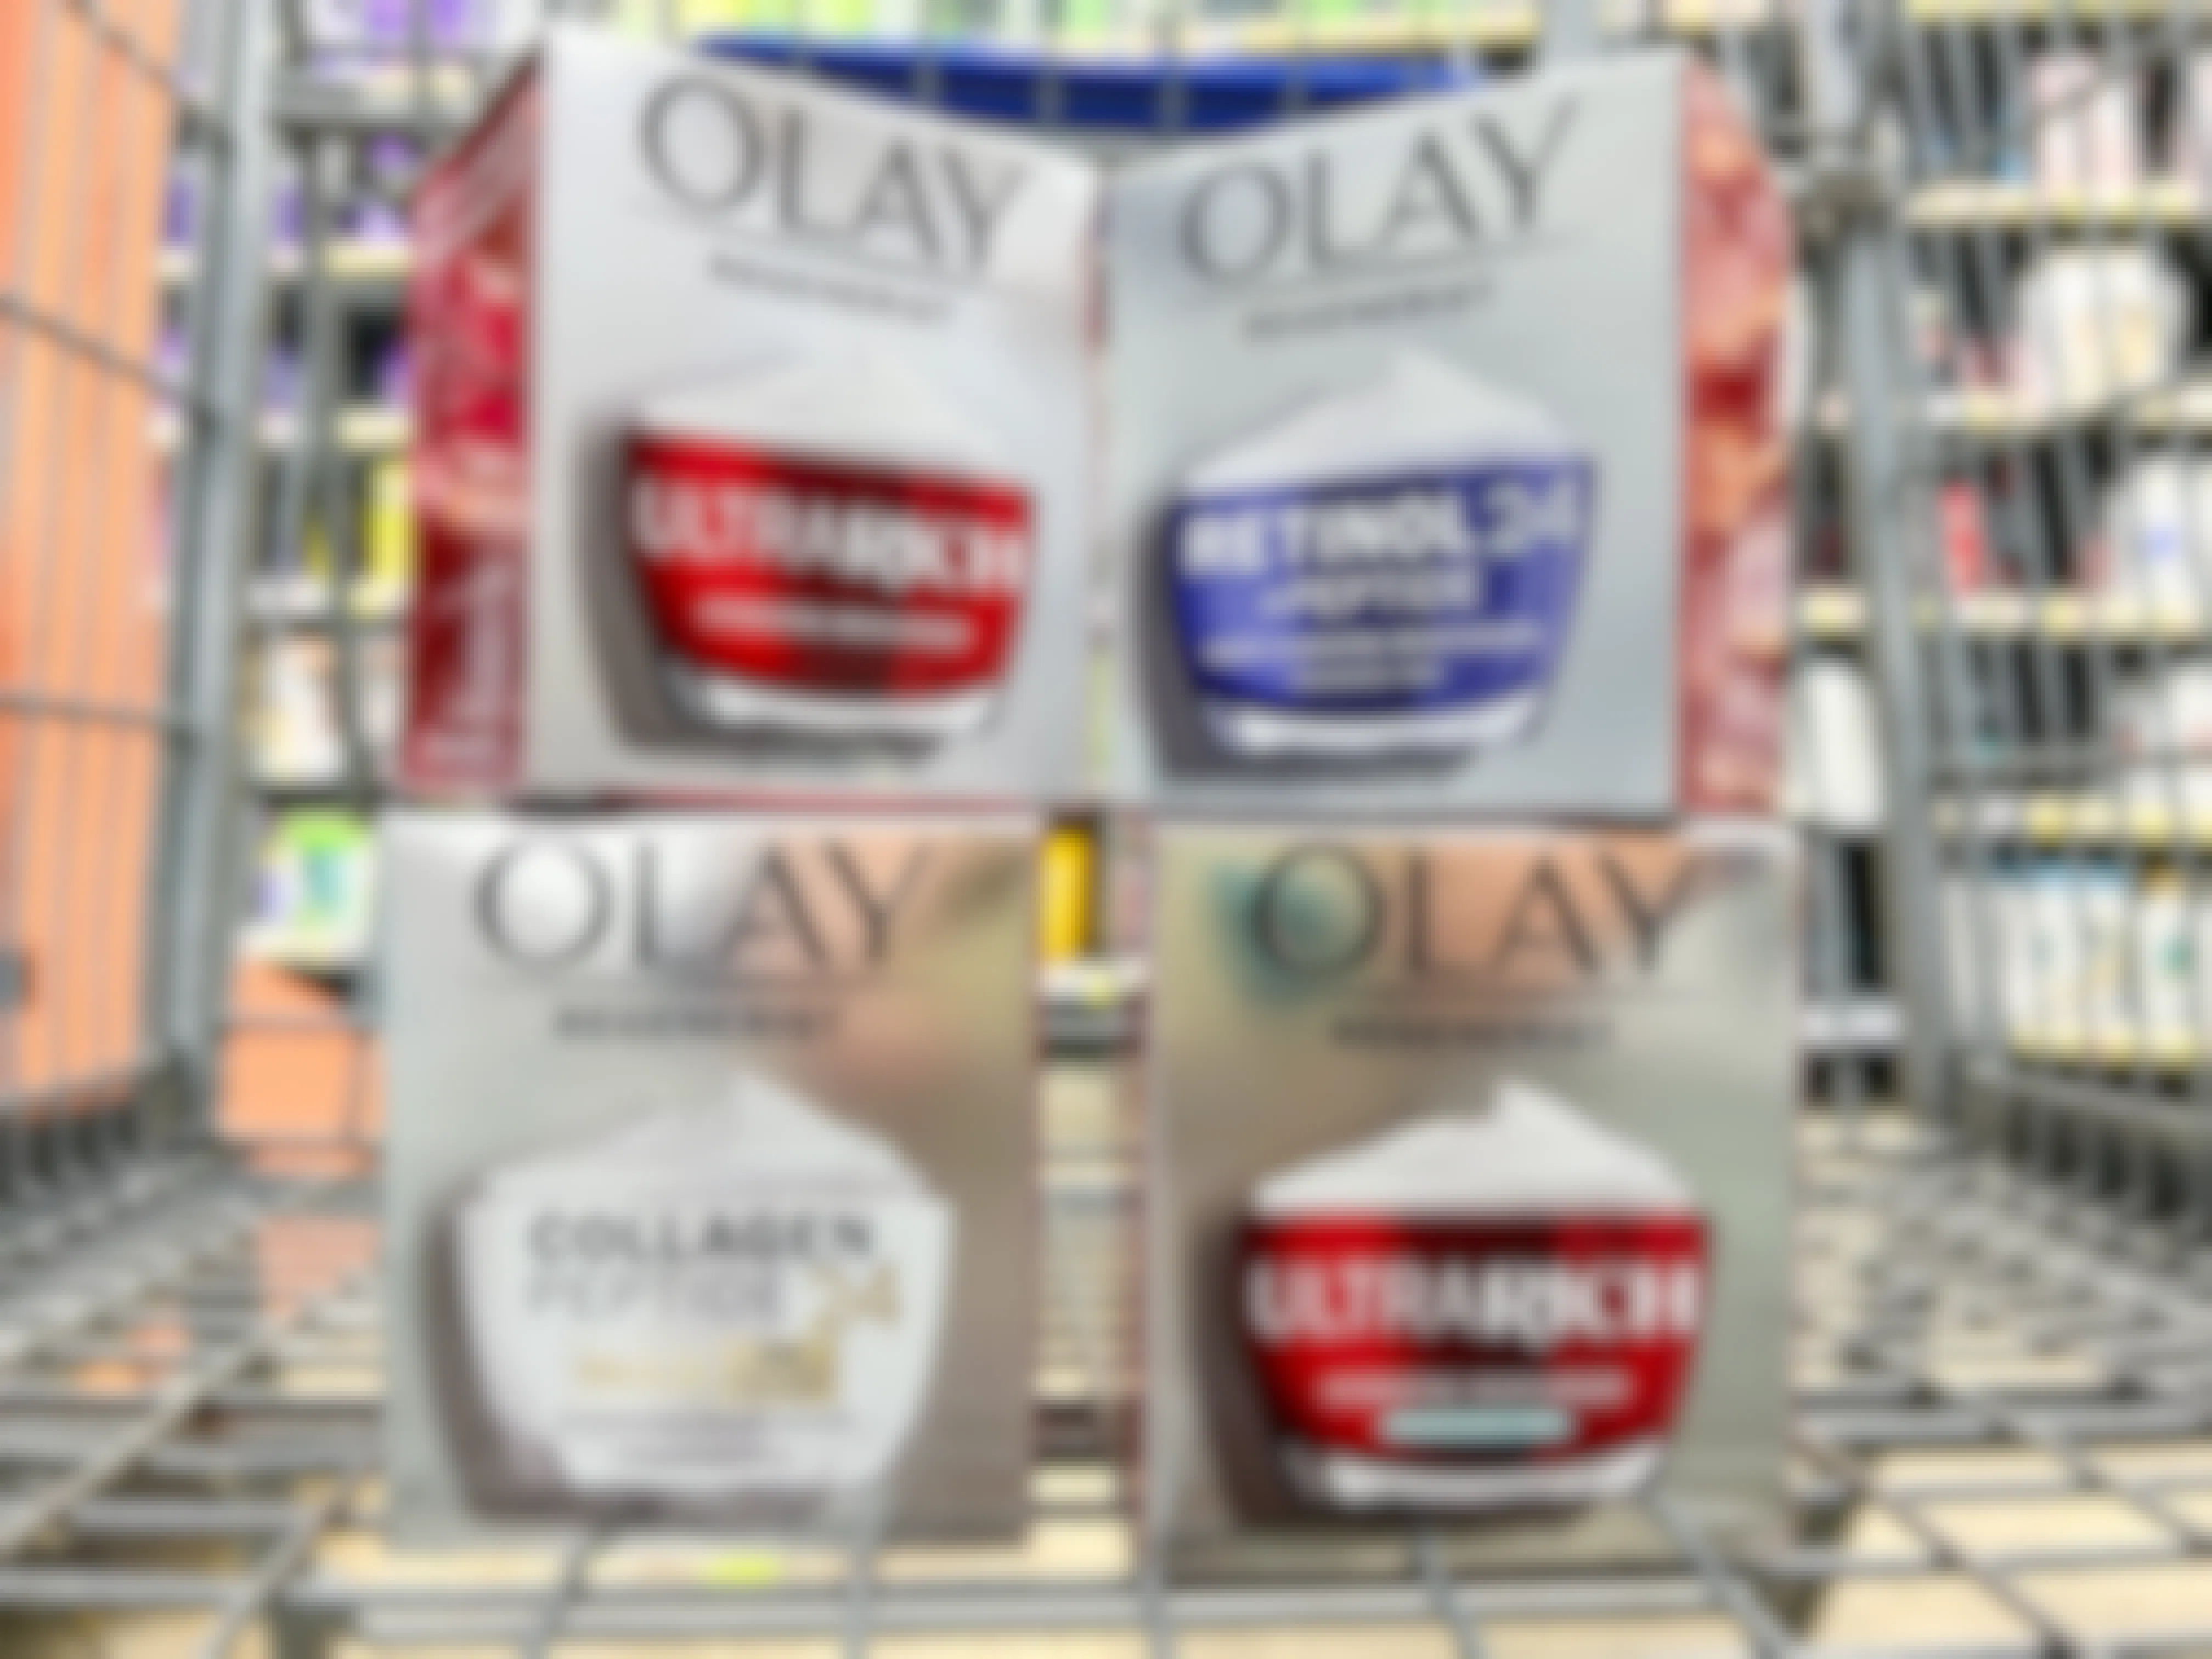 It's Time to Print This High-Value $10 Olay Coupon